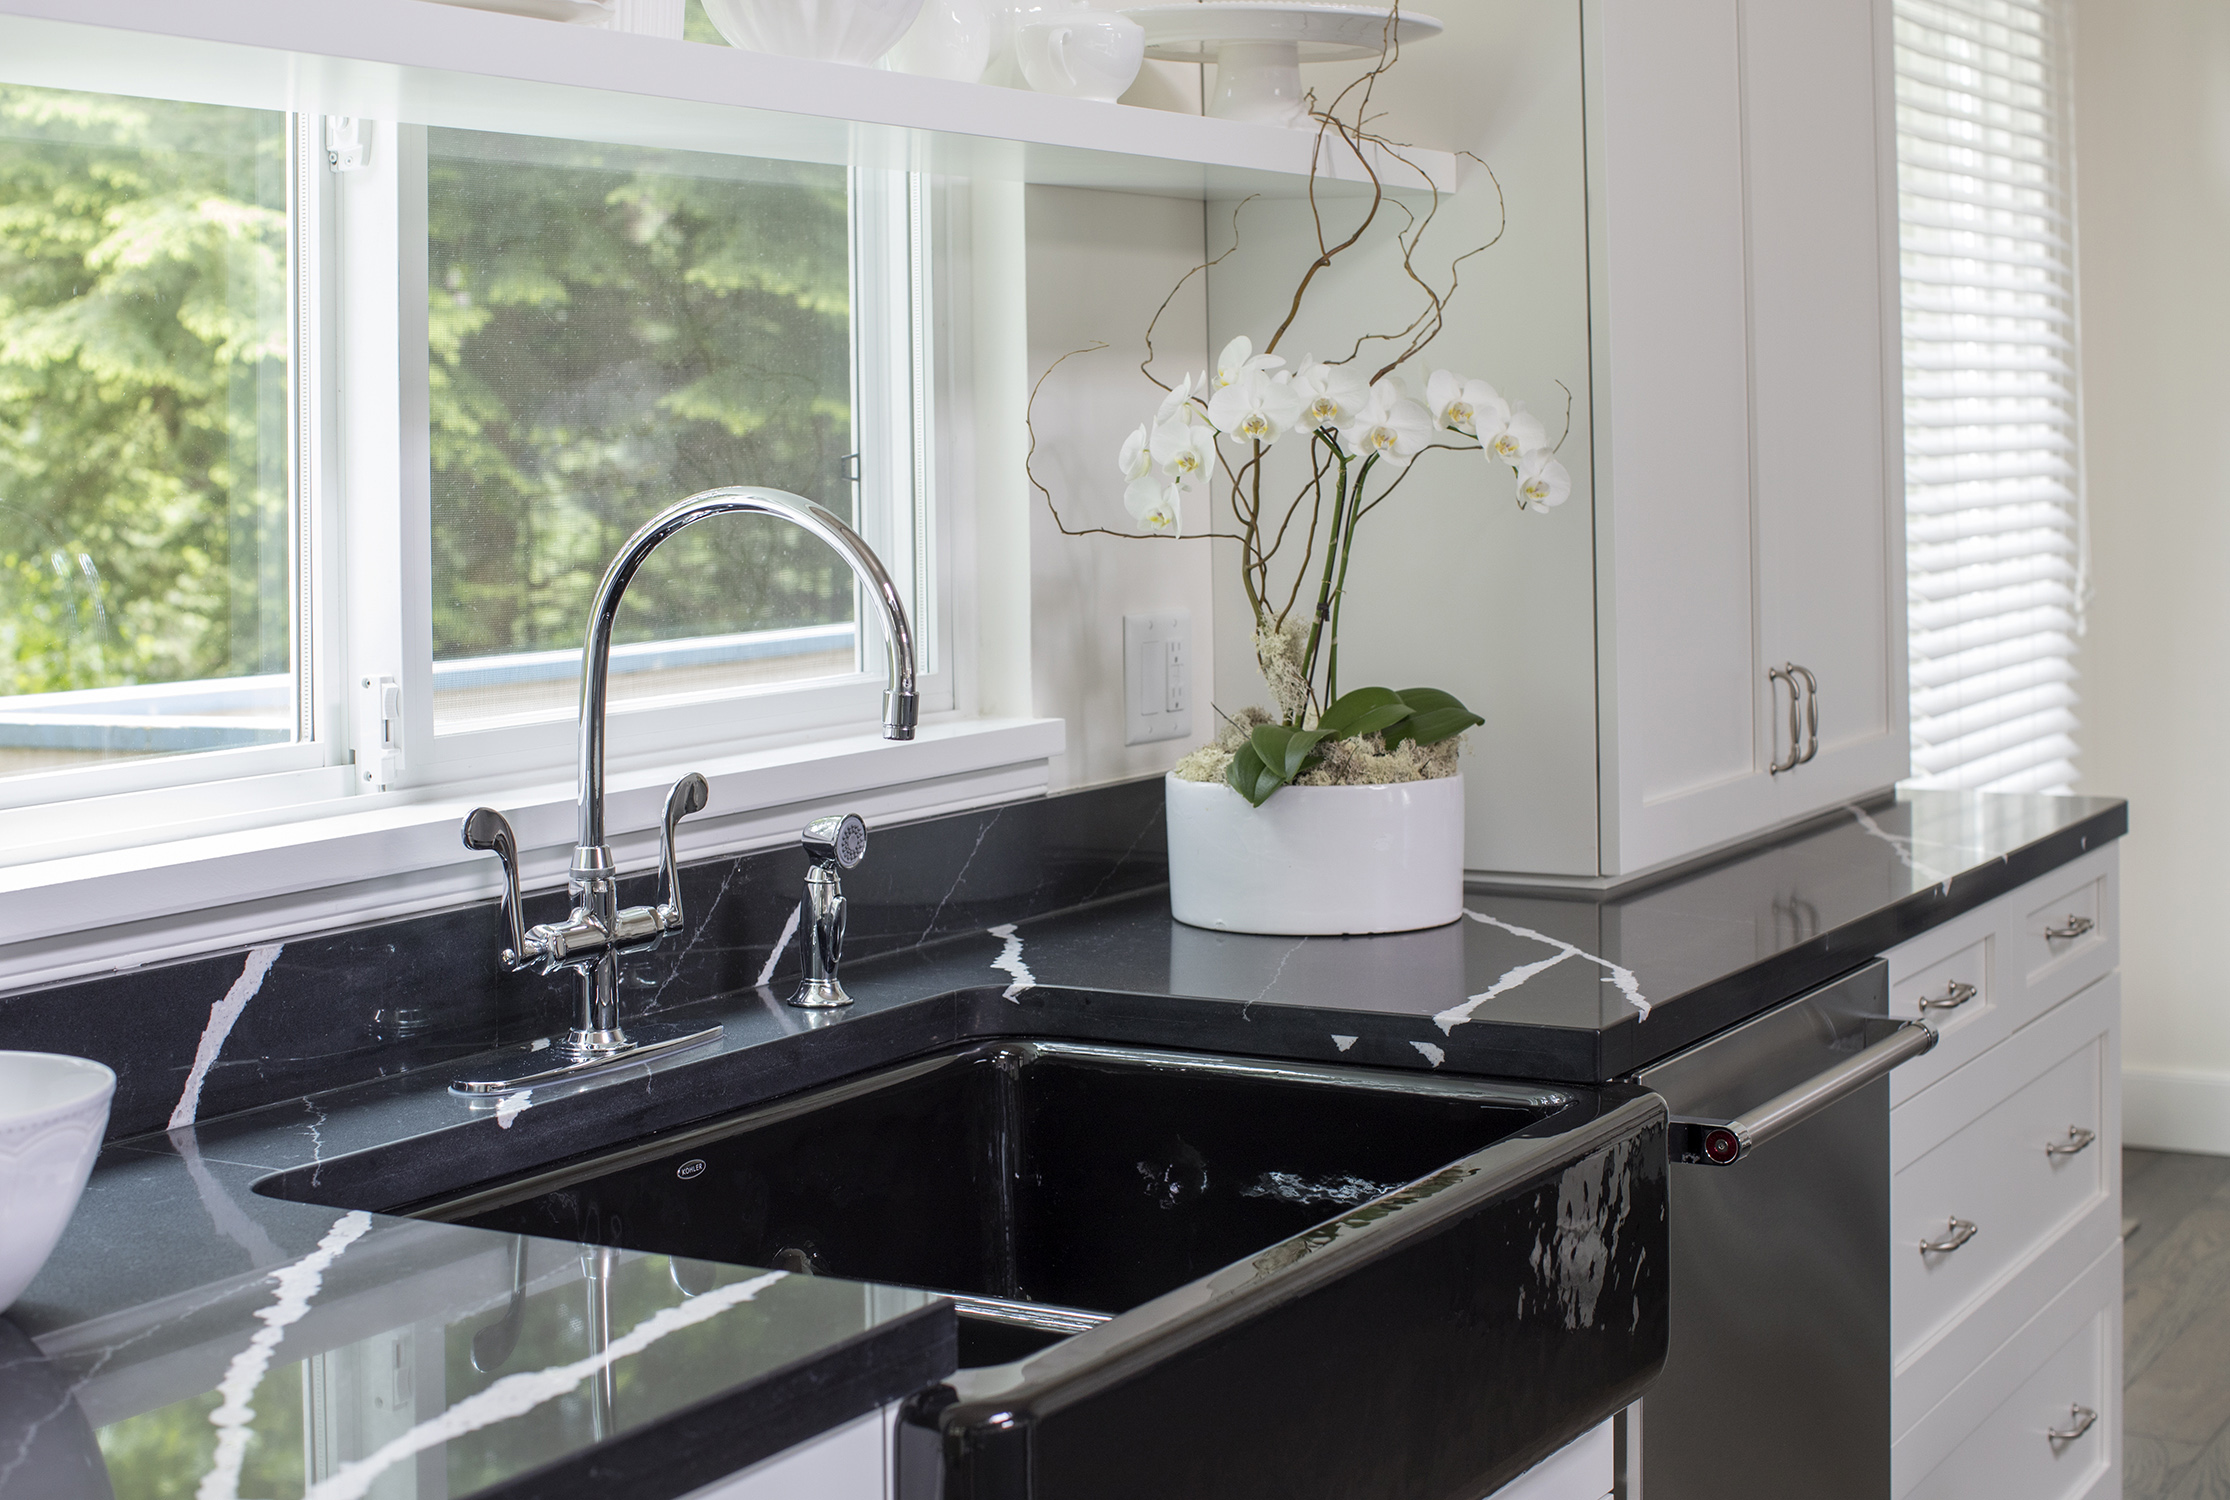 The back wall of the kitchen features a shiny, black apron sink and black quartz countertops with white marble graining.